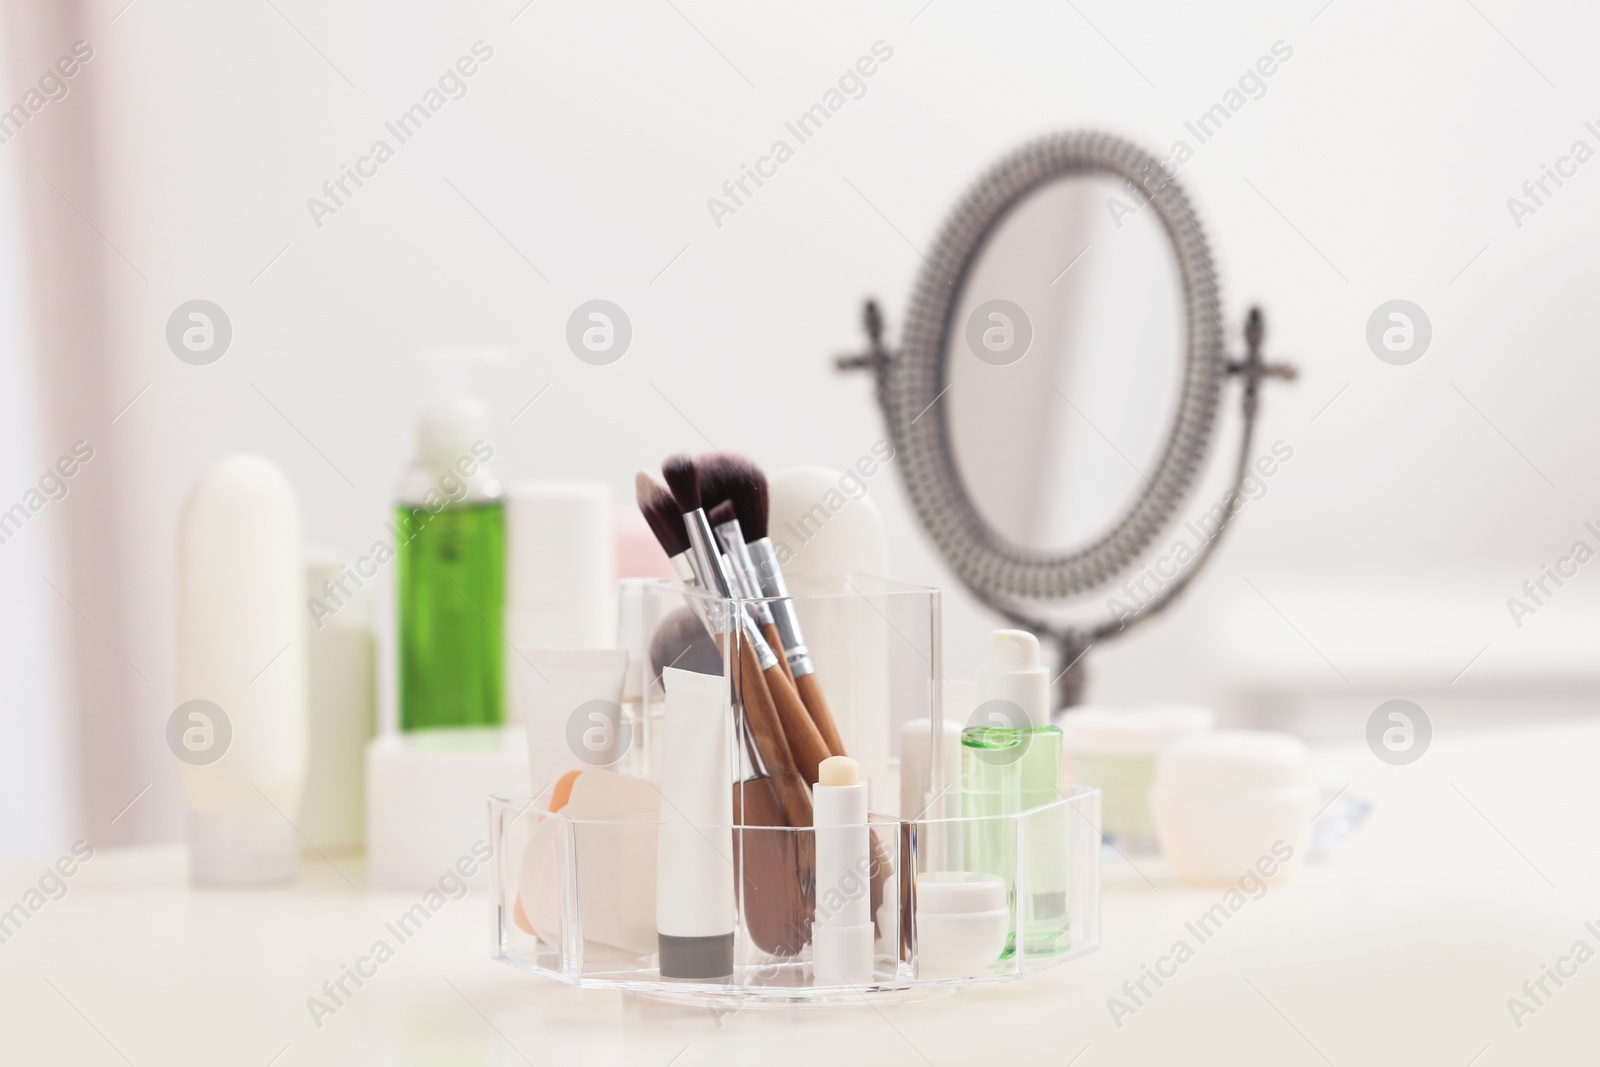 Photo of Organizer with cosmetic products and makeup accessories on table against blurred background